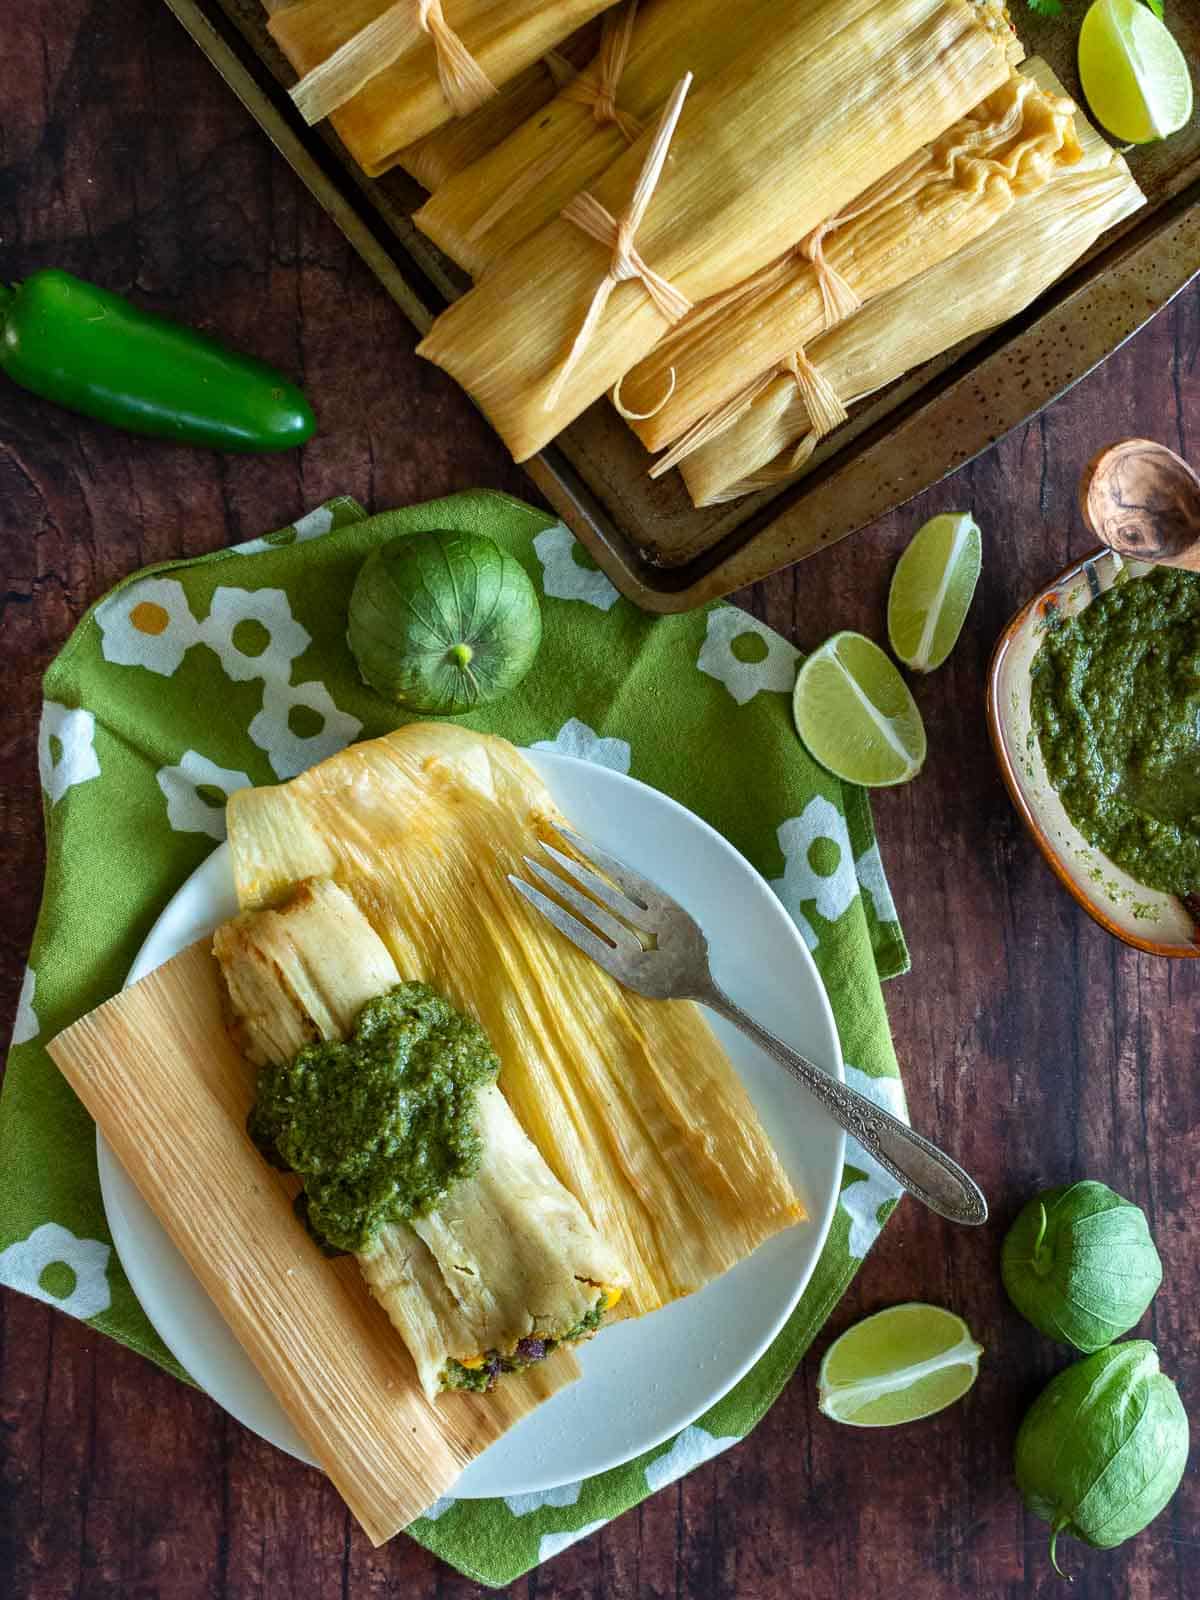 A bowl of stacked tamales on the side and in the center a freshly steamed tamal topped with tomatillo jalapeno salsa.